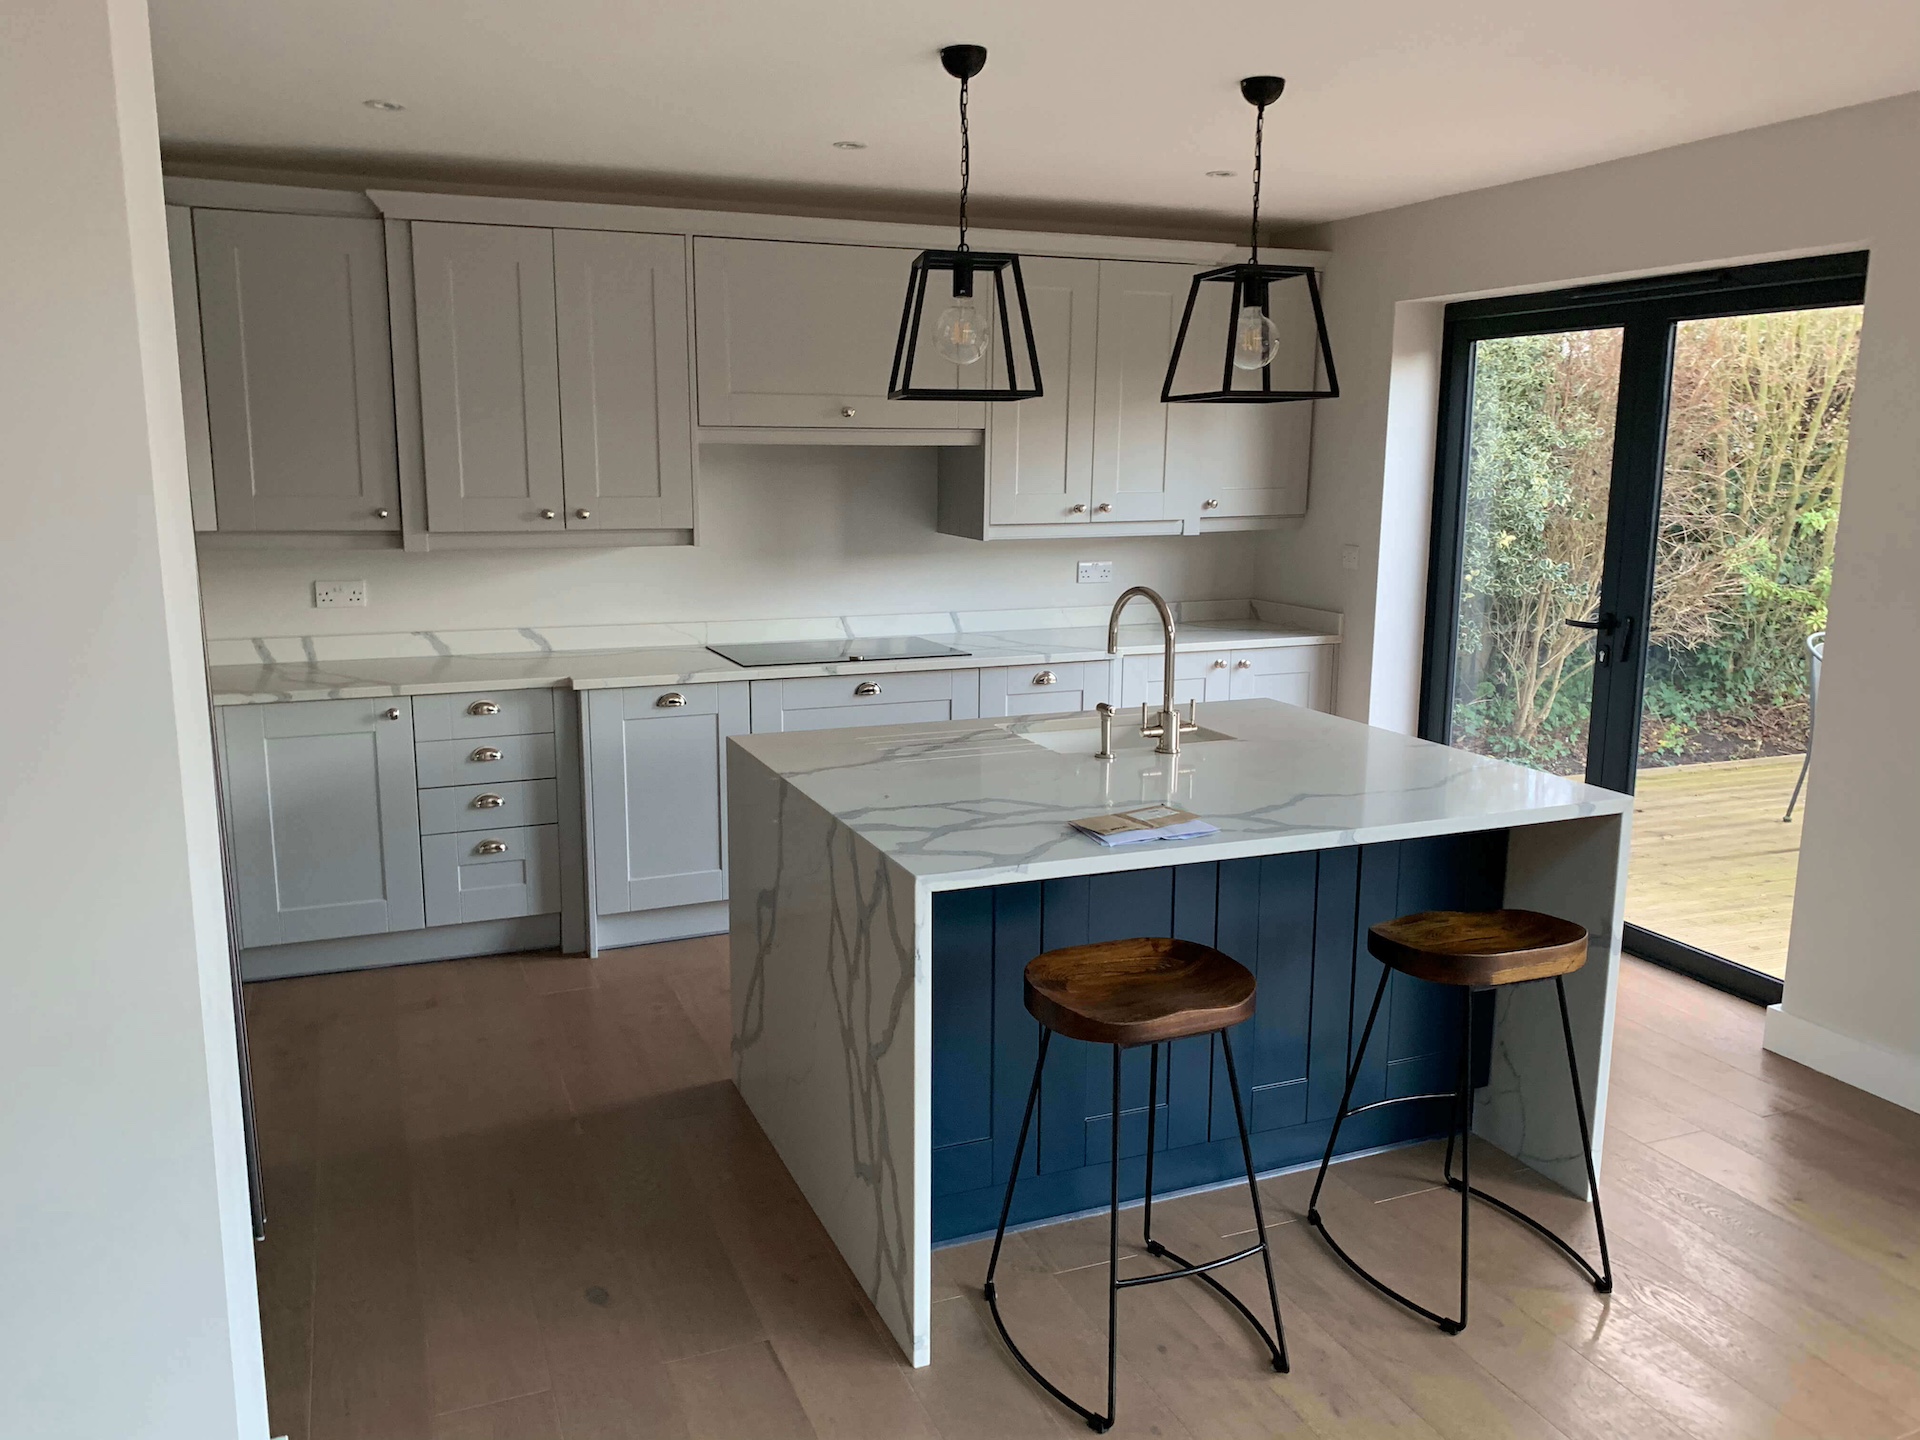 Spotless and sparkling kitchen in Ealing W5, perfectly cleaned after an end of tenancy cleaning service by Cleaningsure, showcasing a pristine countertop, gleaming appliances, and a clean floor.